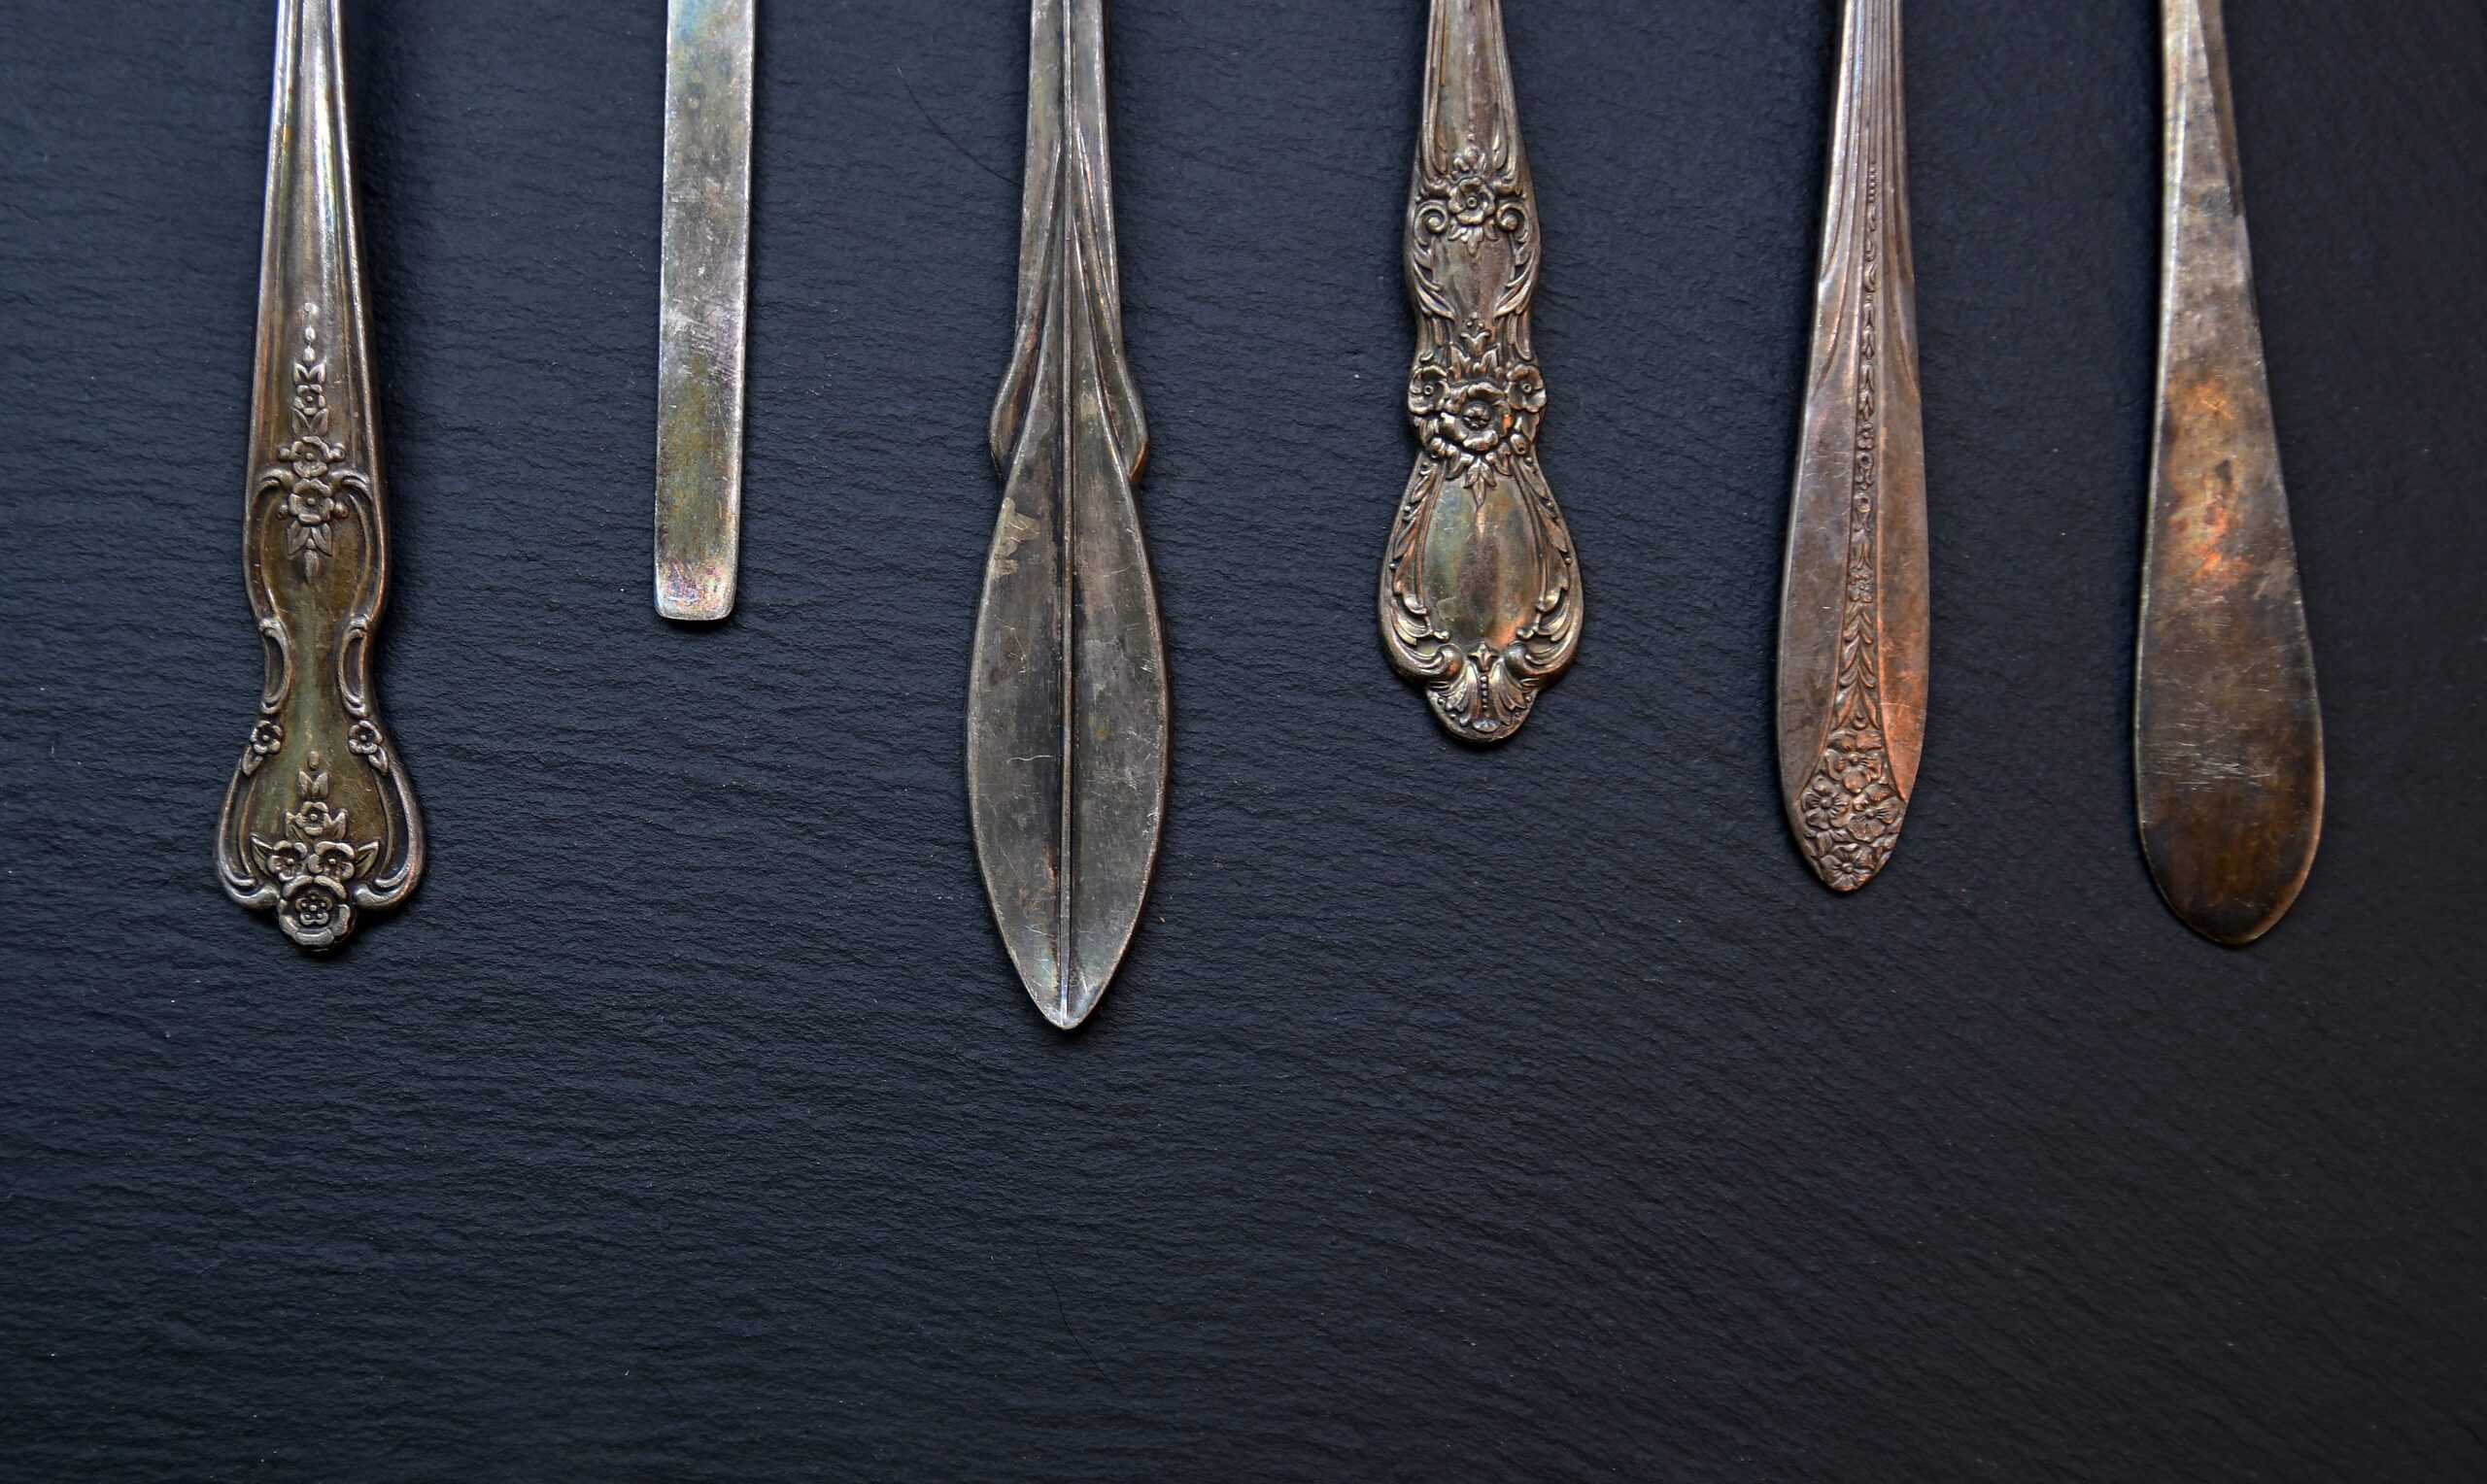 Ends of sterling silver utensils.